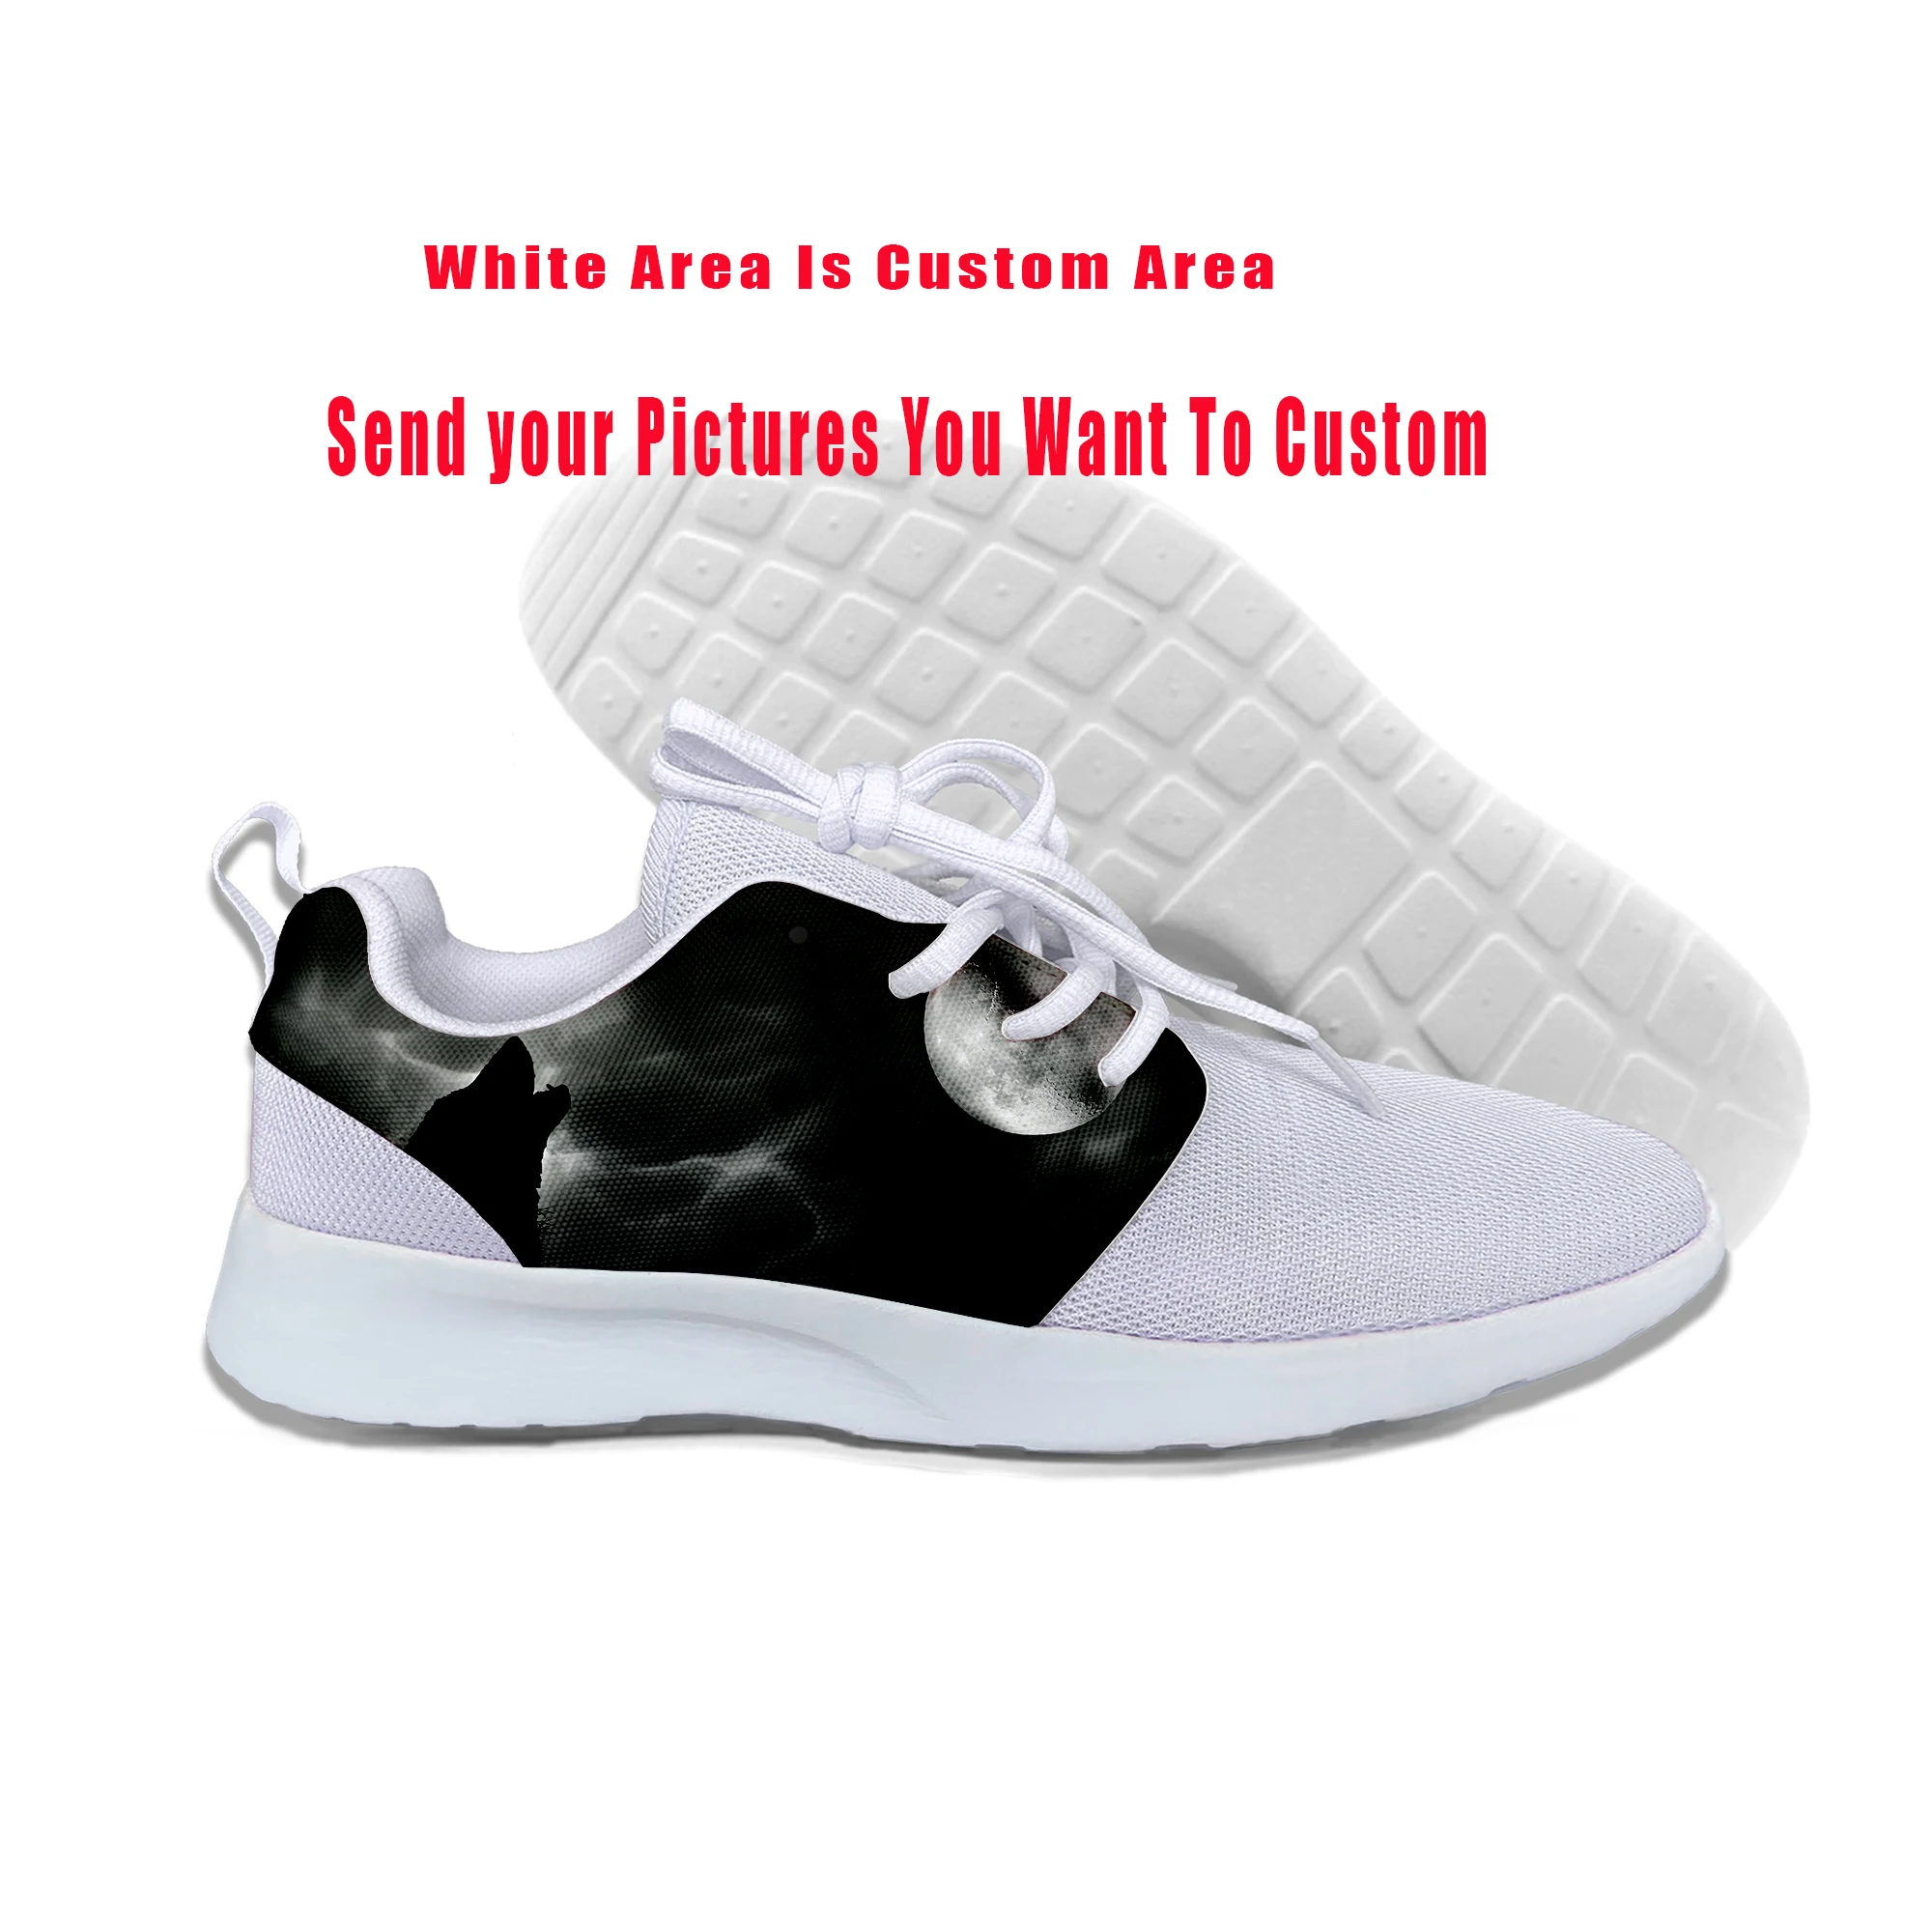 

Hot Summer Starry Wolf Shoes Man Funny Classic Sneakers Wolf Woman Hot Cute 90s Animal Lightweight Shoes Fashion Sports Shoes